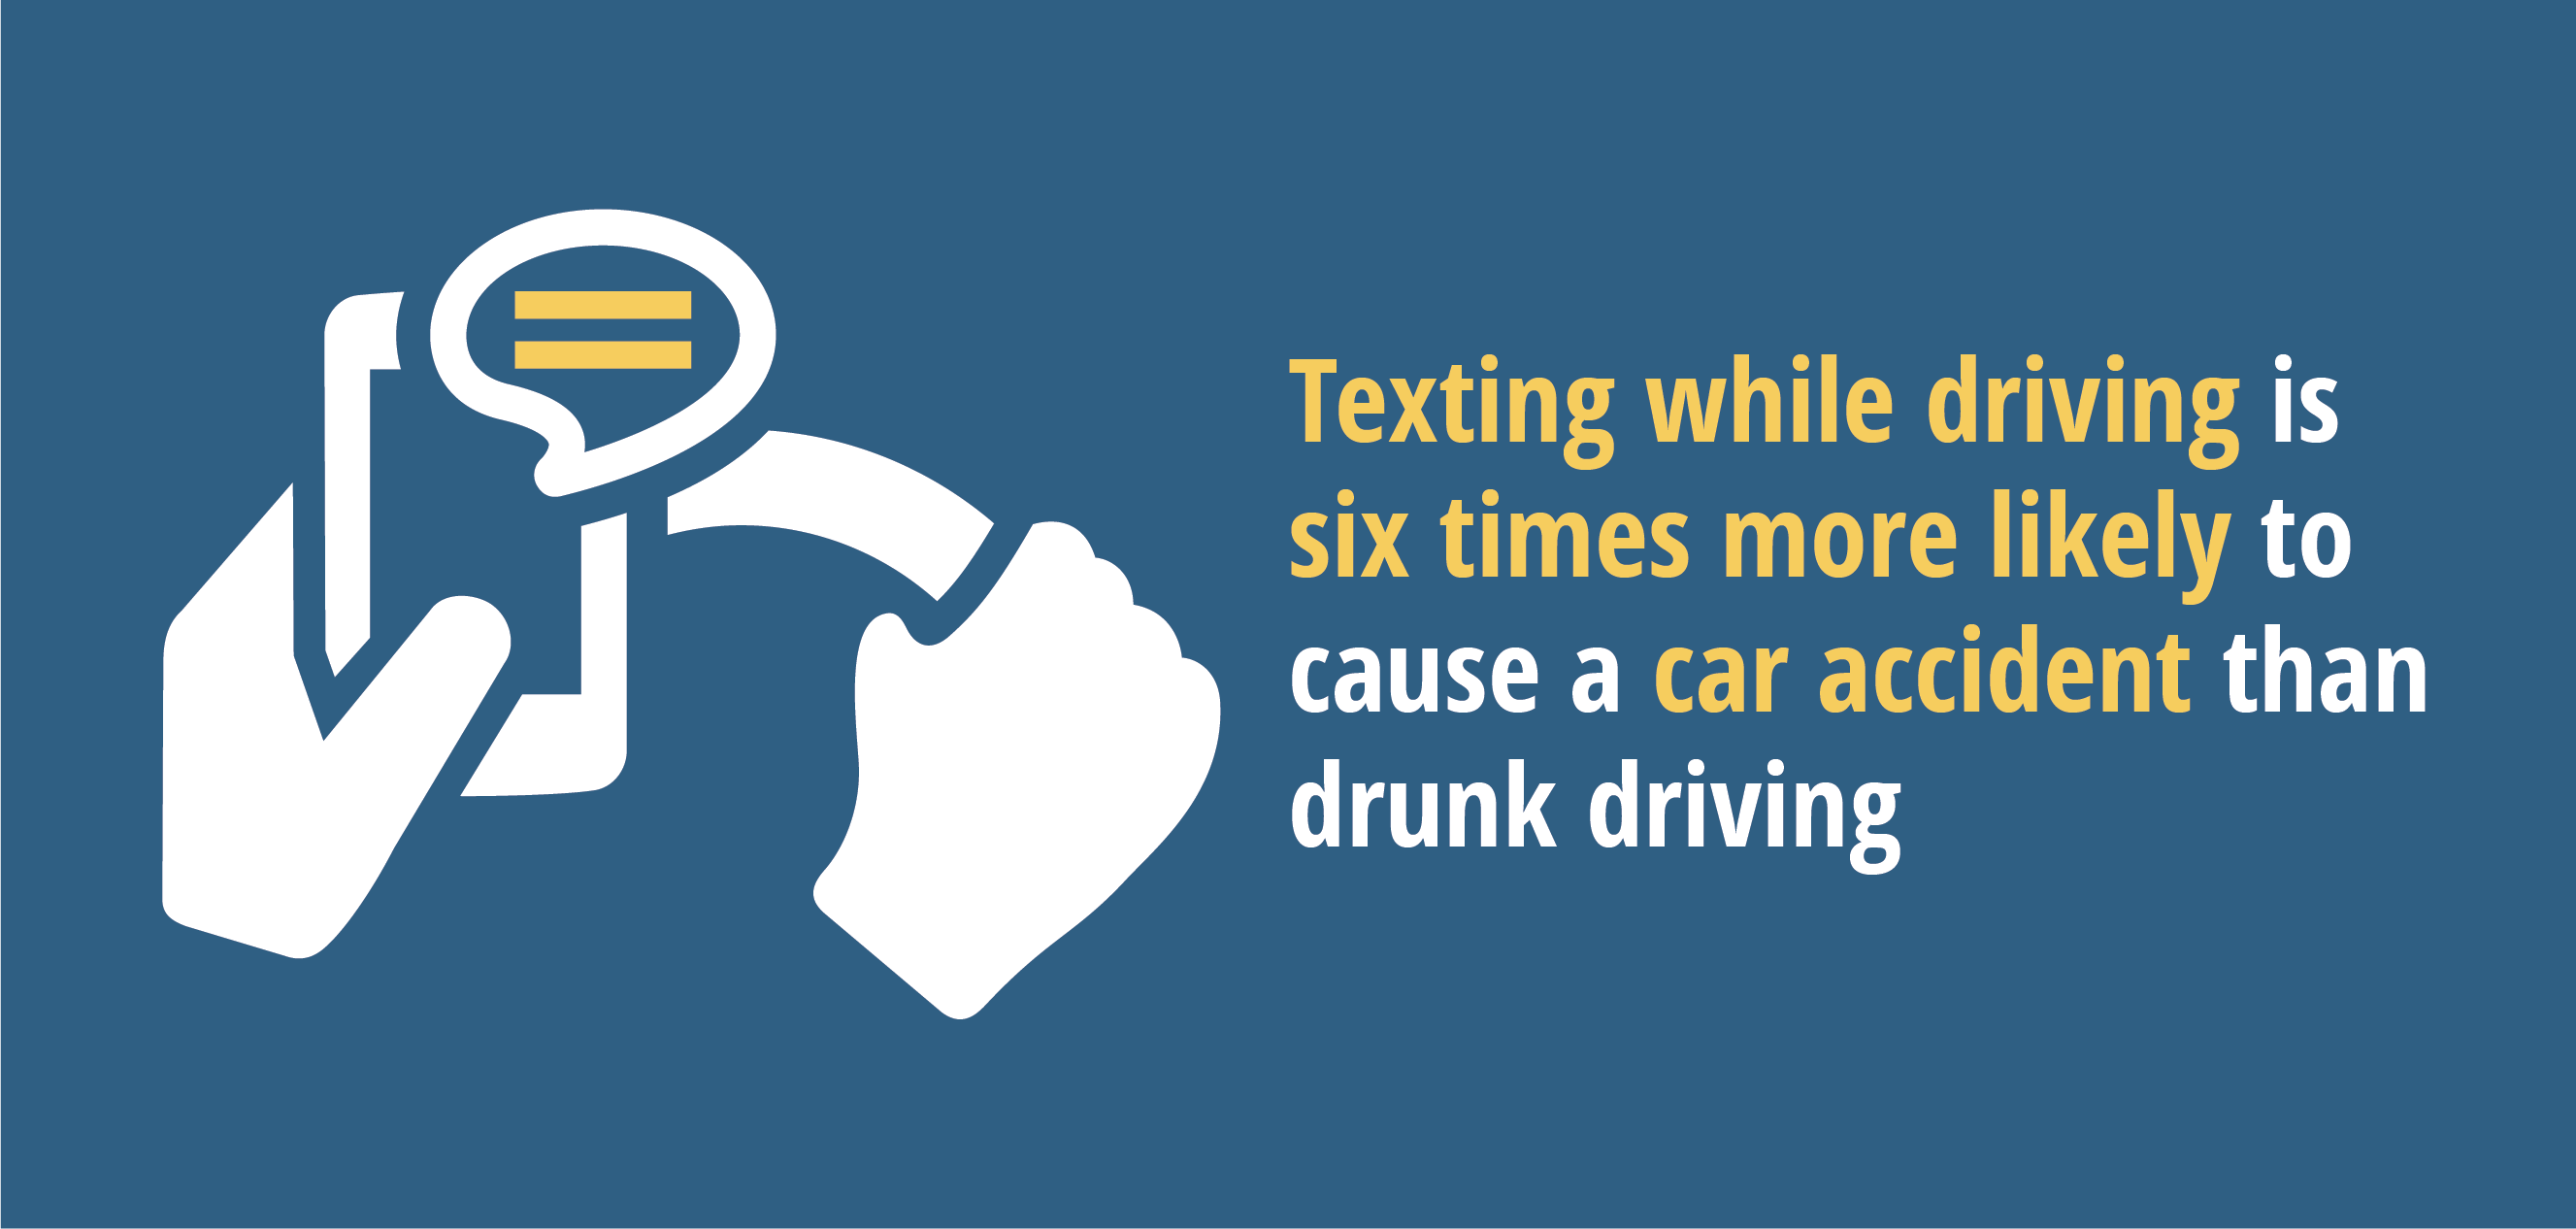 Texting while driving is six times more likely to cause a car accident than drunk driving